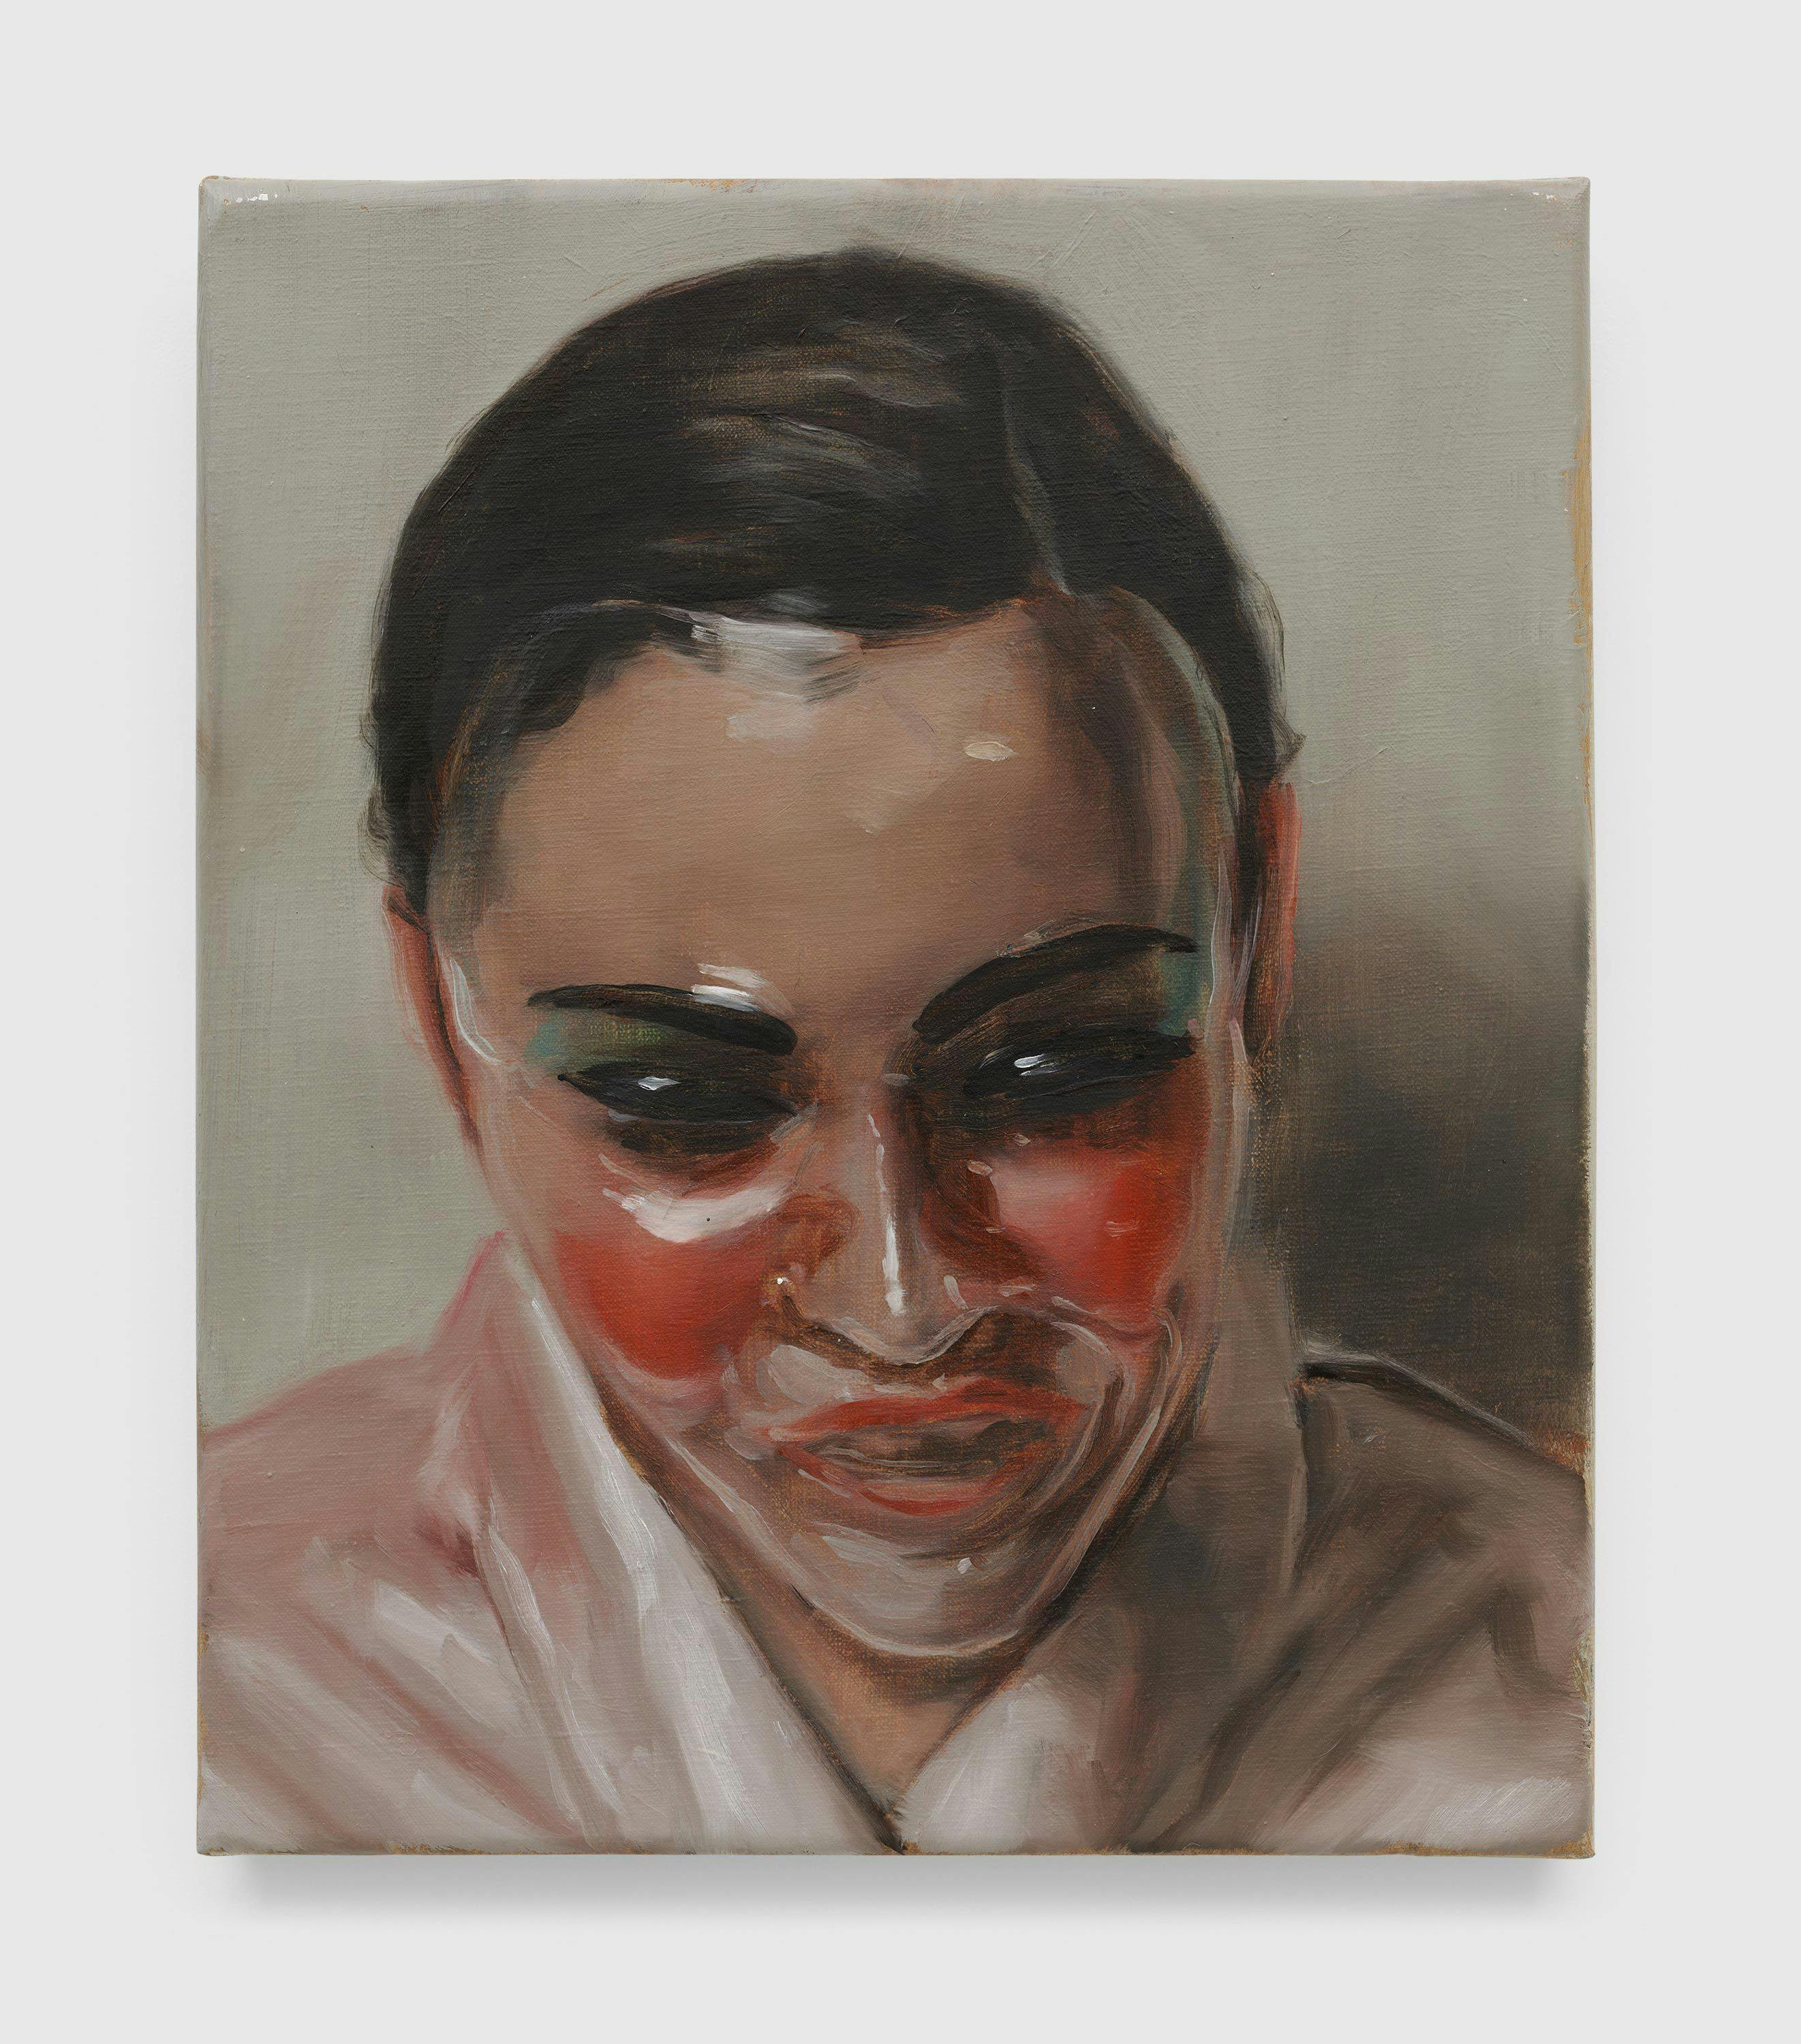 A painting by Michaël Borremans, titled Mombakkes II, dated 2007.